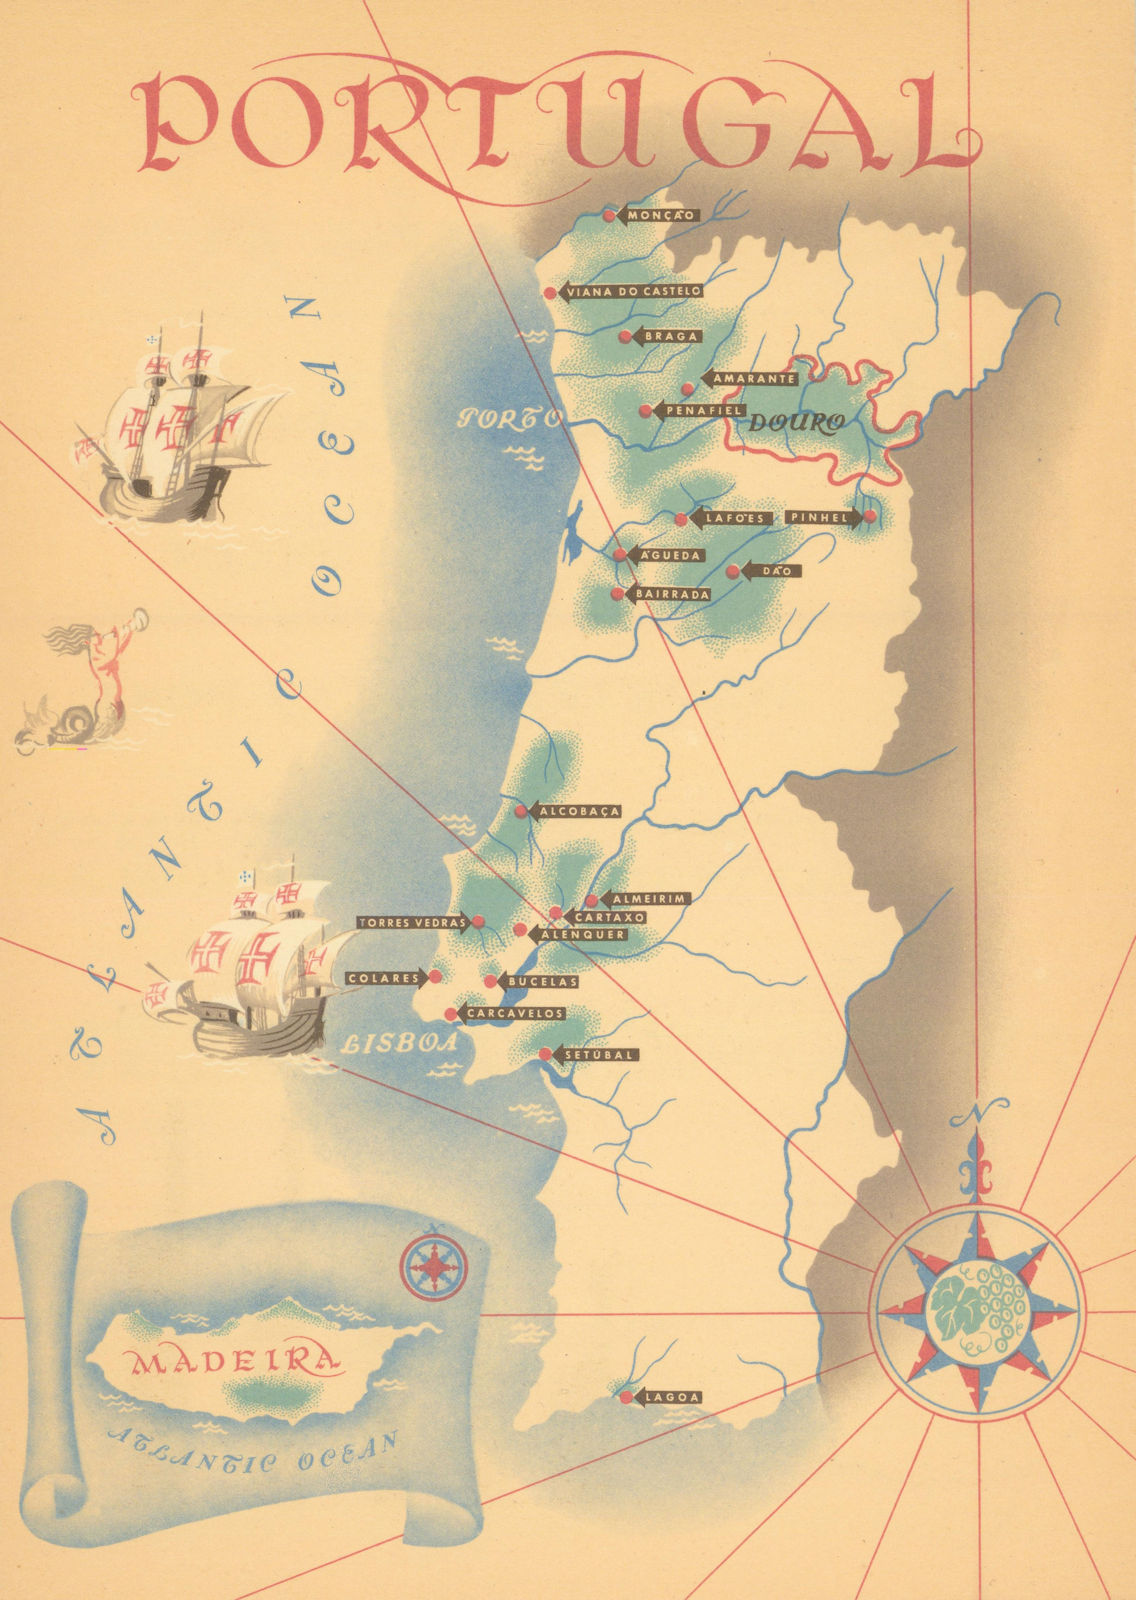 Portugal & Madeira wine districts map by Mario Costa 1948 old vintage